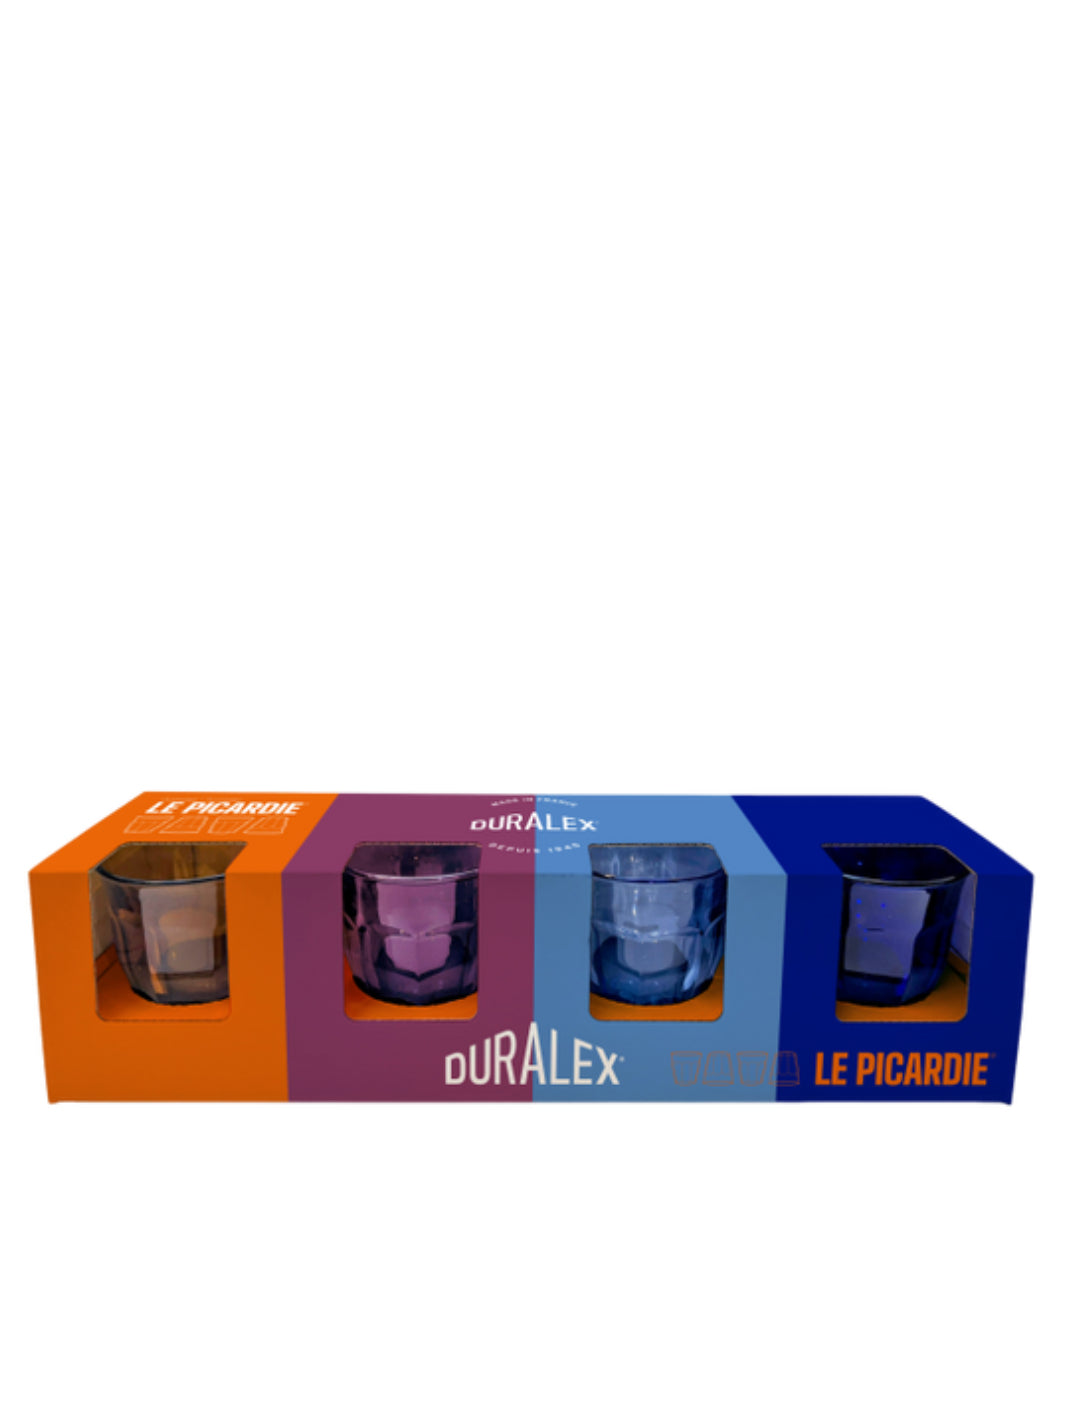 DURALEX Le Picardie® Assorted Colours Glass Tumbler Gift Box (250ml/8.5oz) (4-Pack)